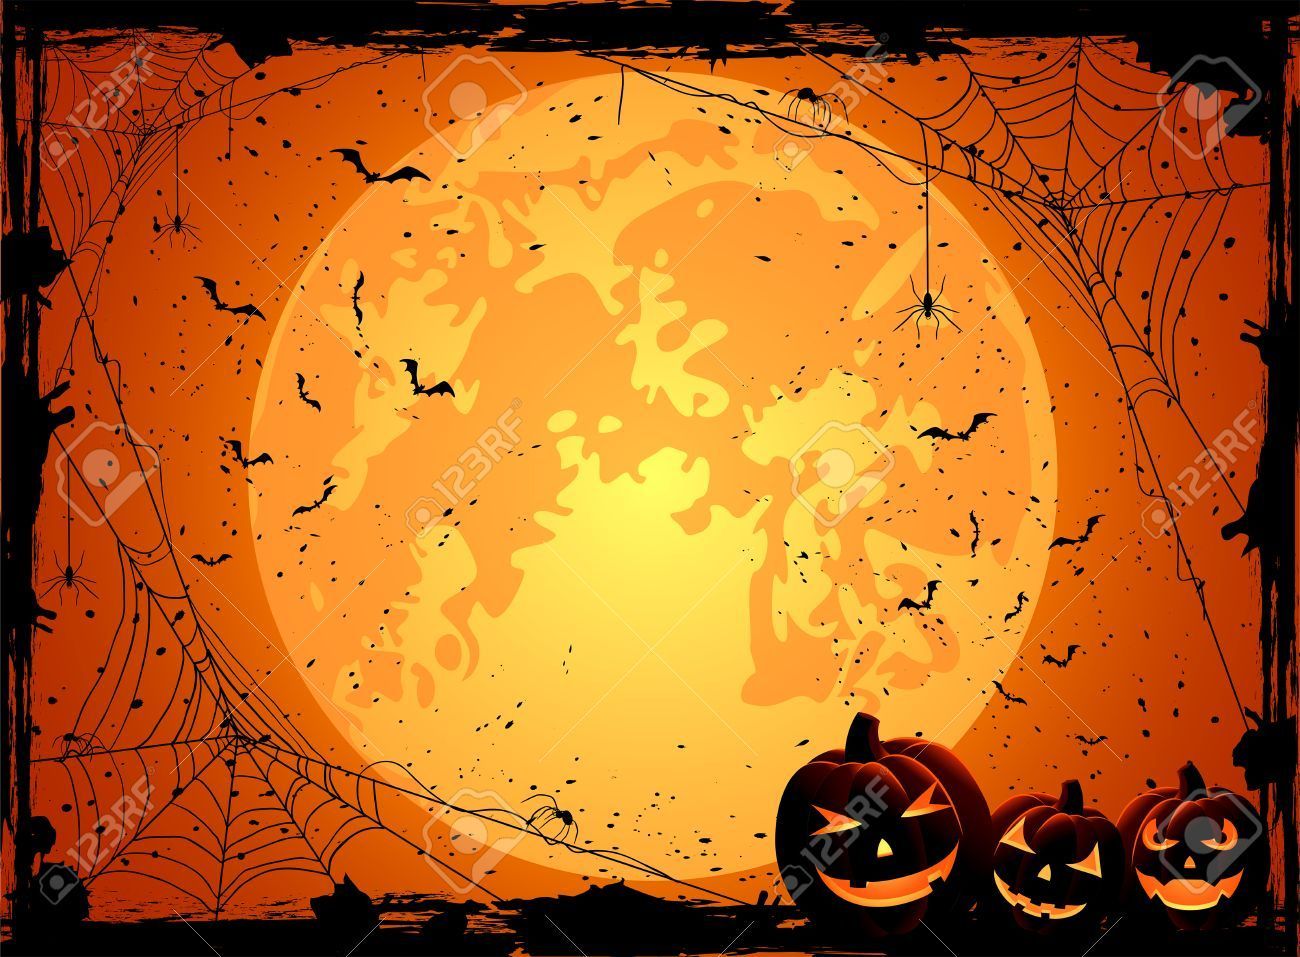 Horizontal Halloween night background with Moon, spiders and Jack O, #affiliate, #night, #Halloween. Halloween wallpaper, Halloween image, Halloween background